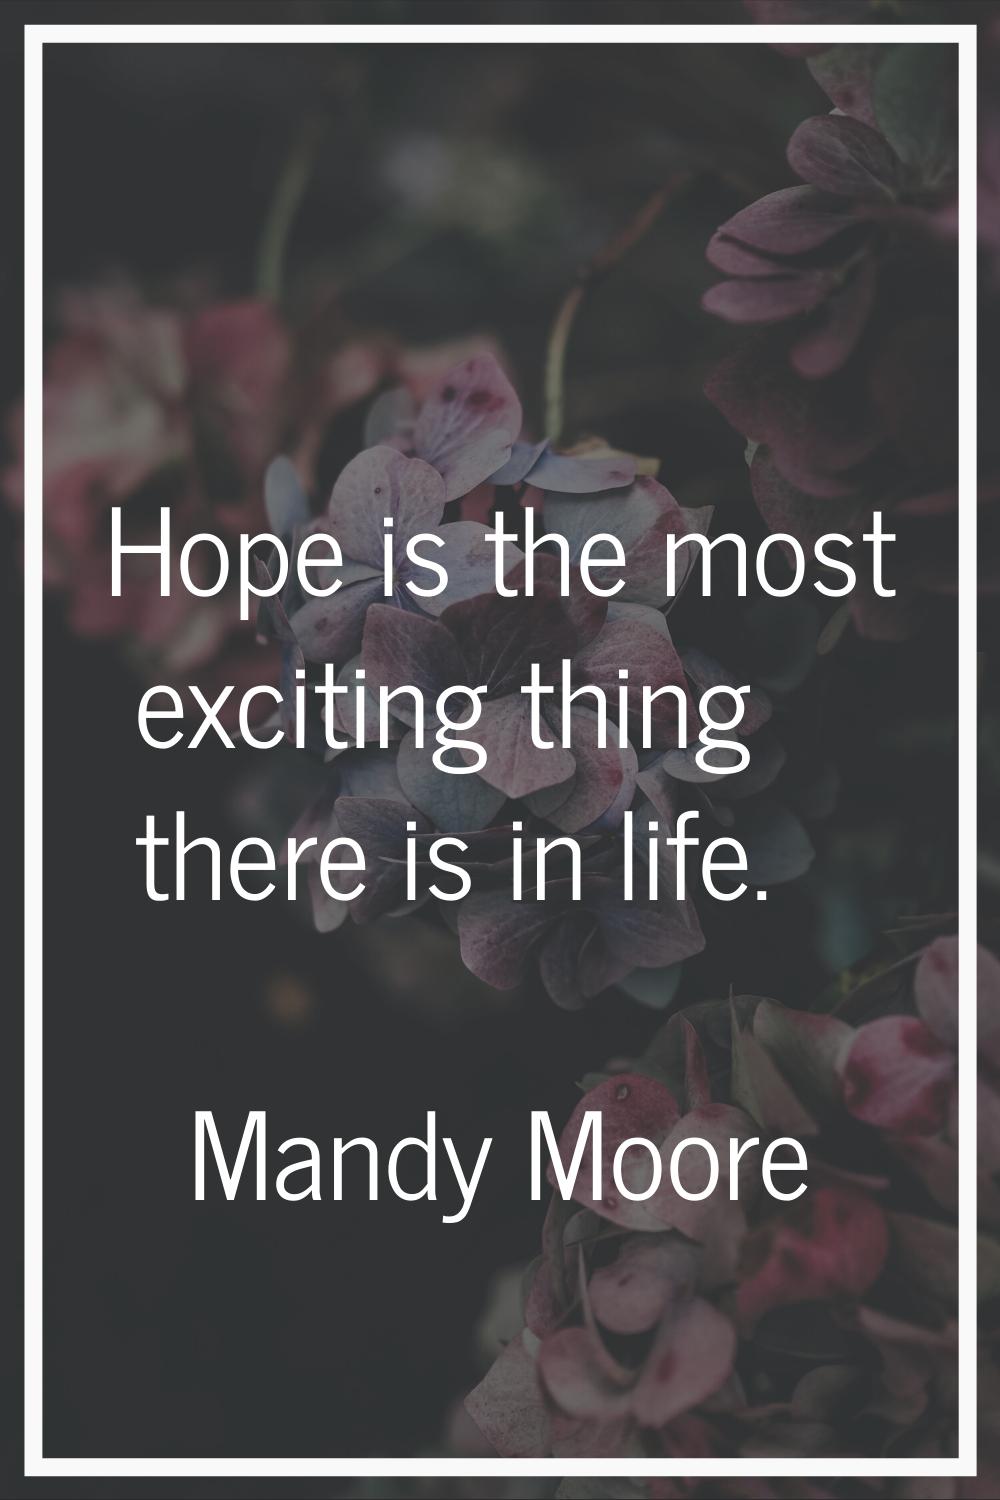 Hope is the most exciting thing there is in life.